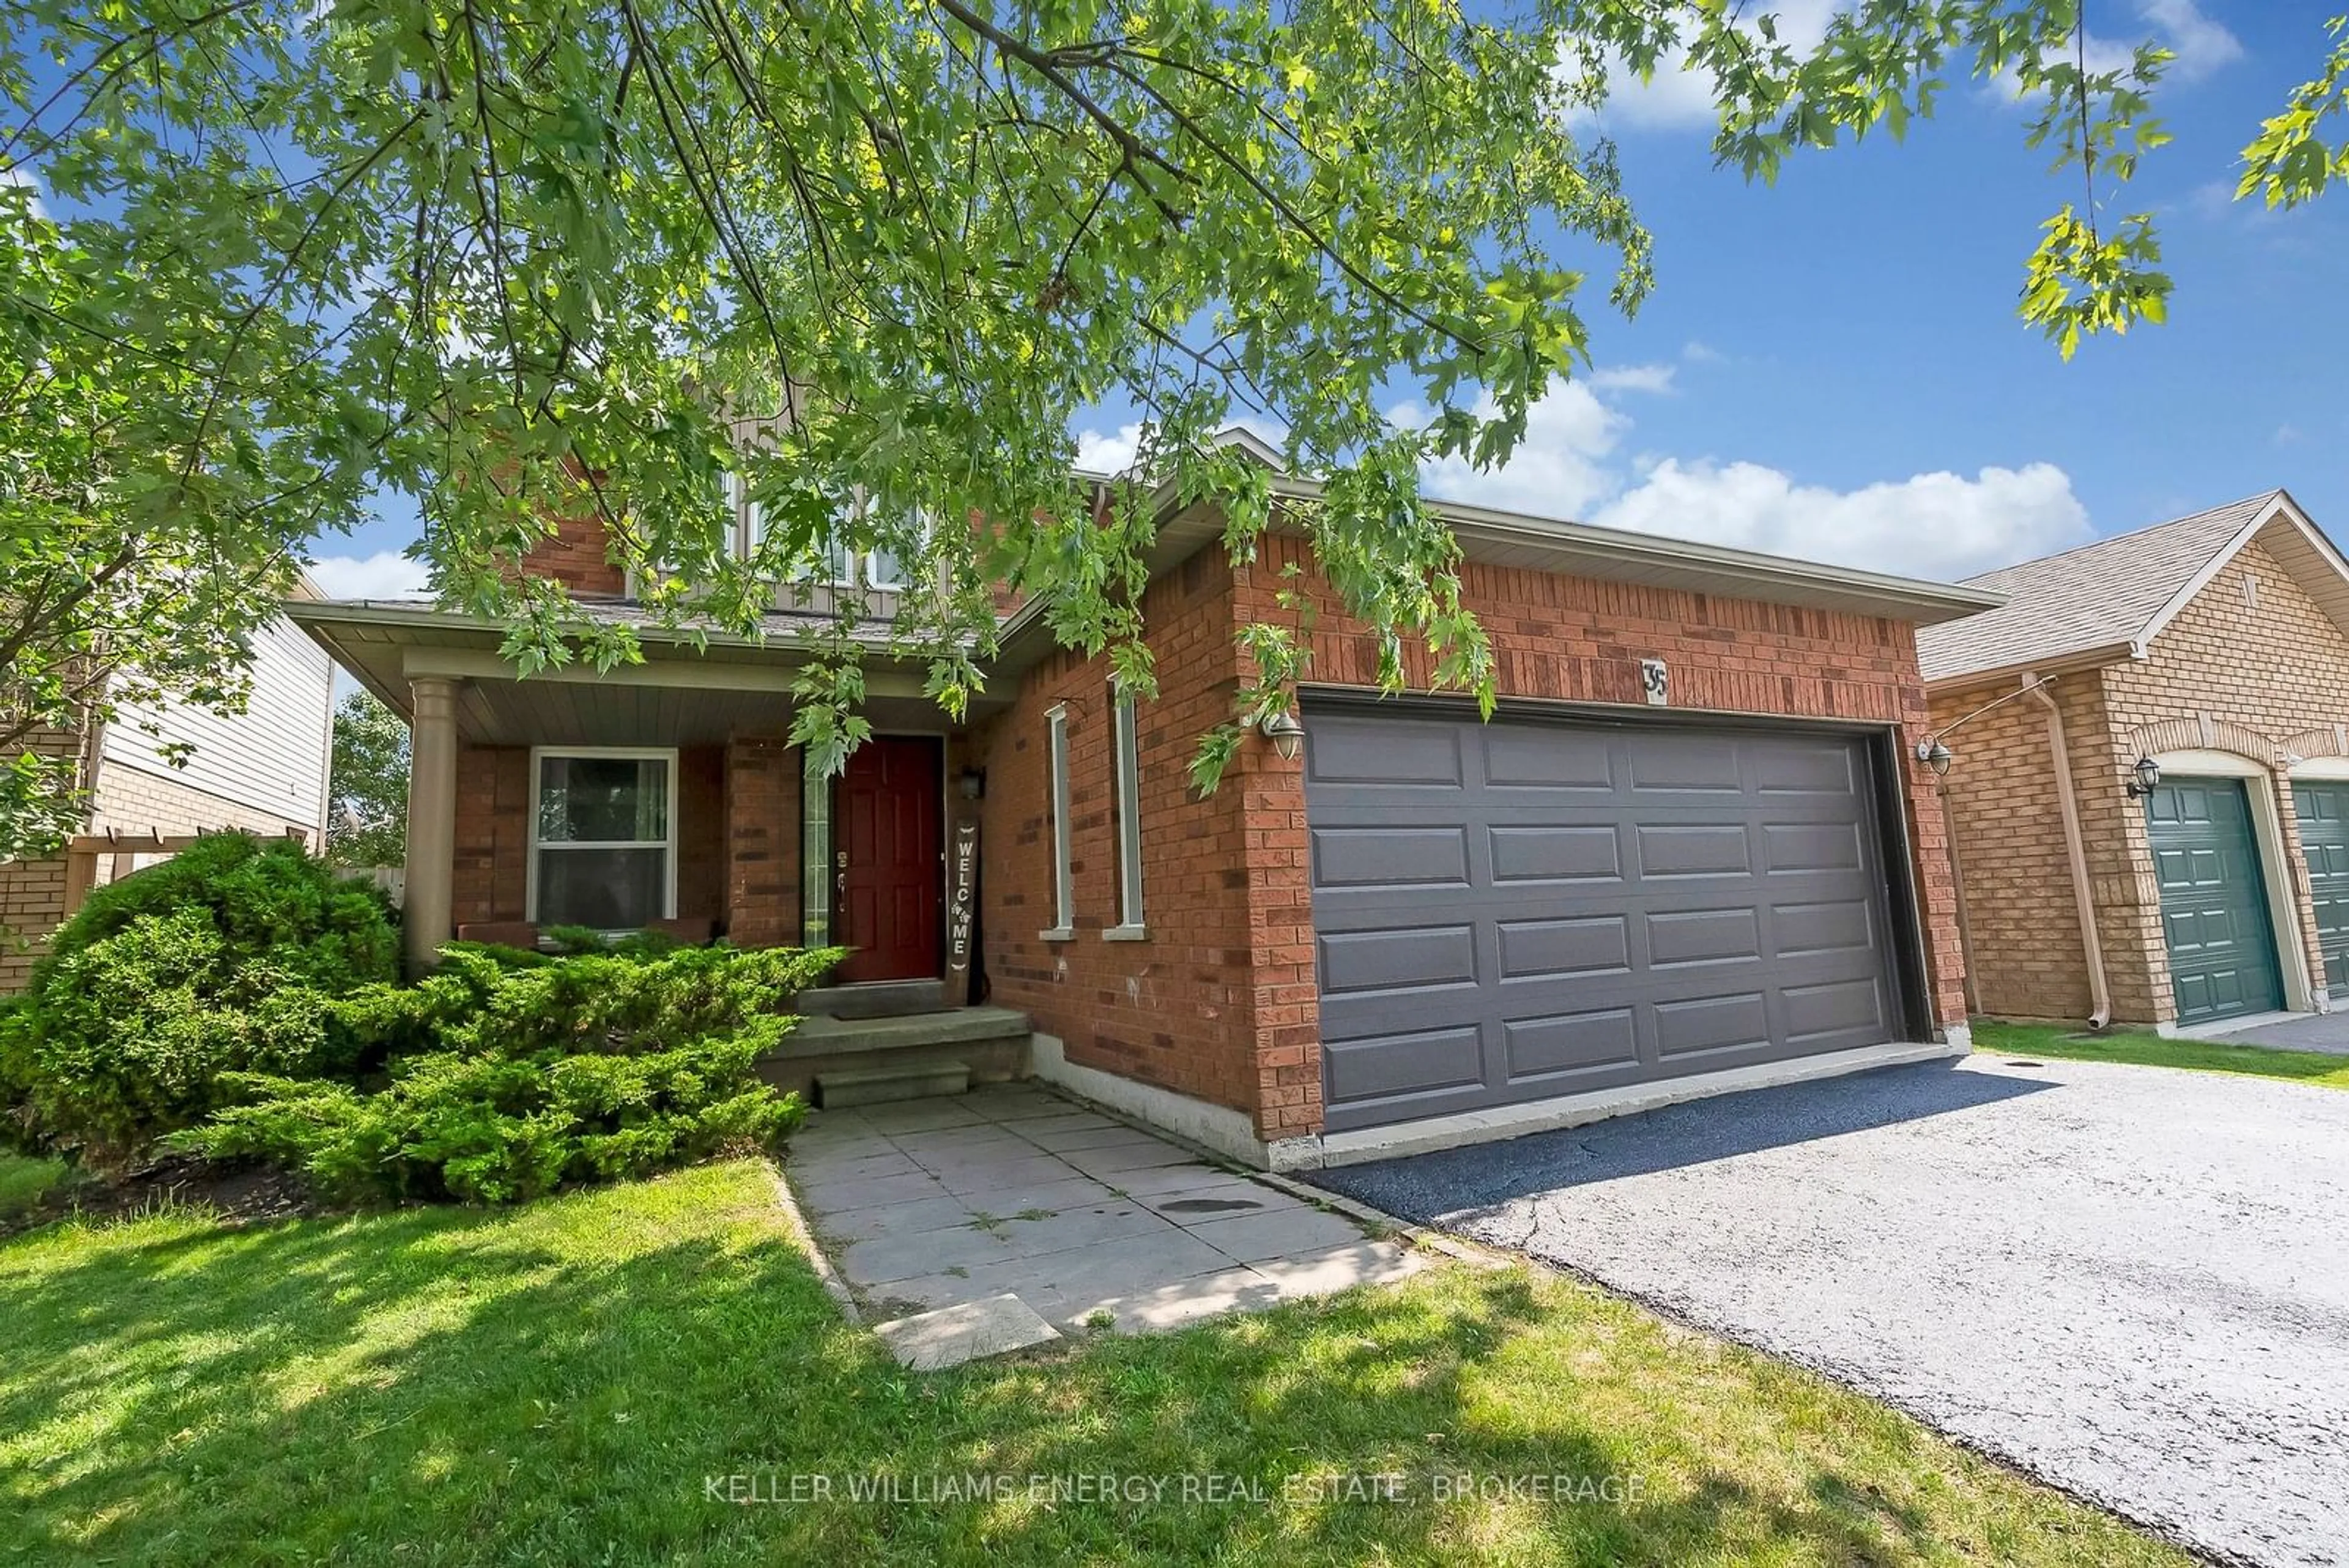 Home with brick exterior material for 35 Goodwin Ave, Clarington Ontario L1C 4Z5